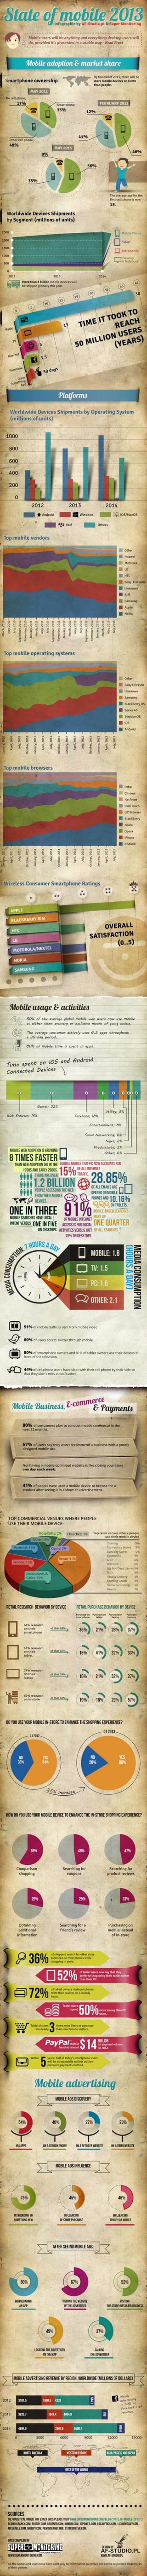 Mobile Growth Statistics - 2013 Infographic